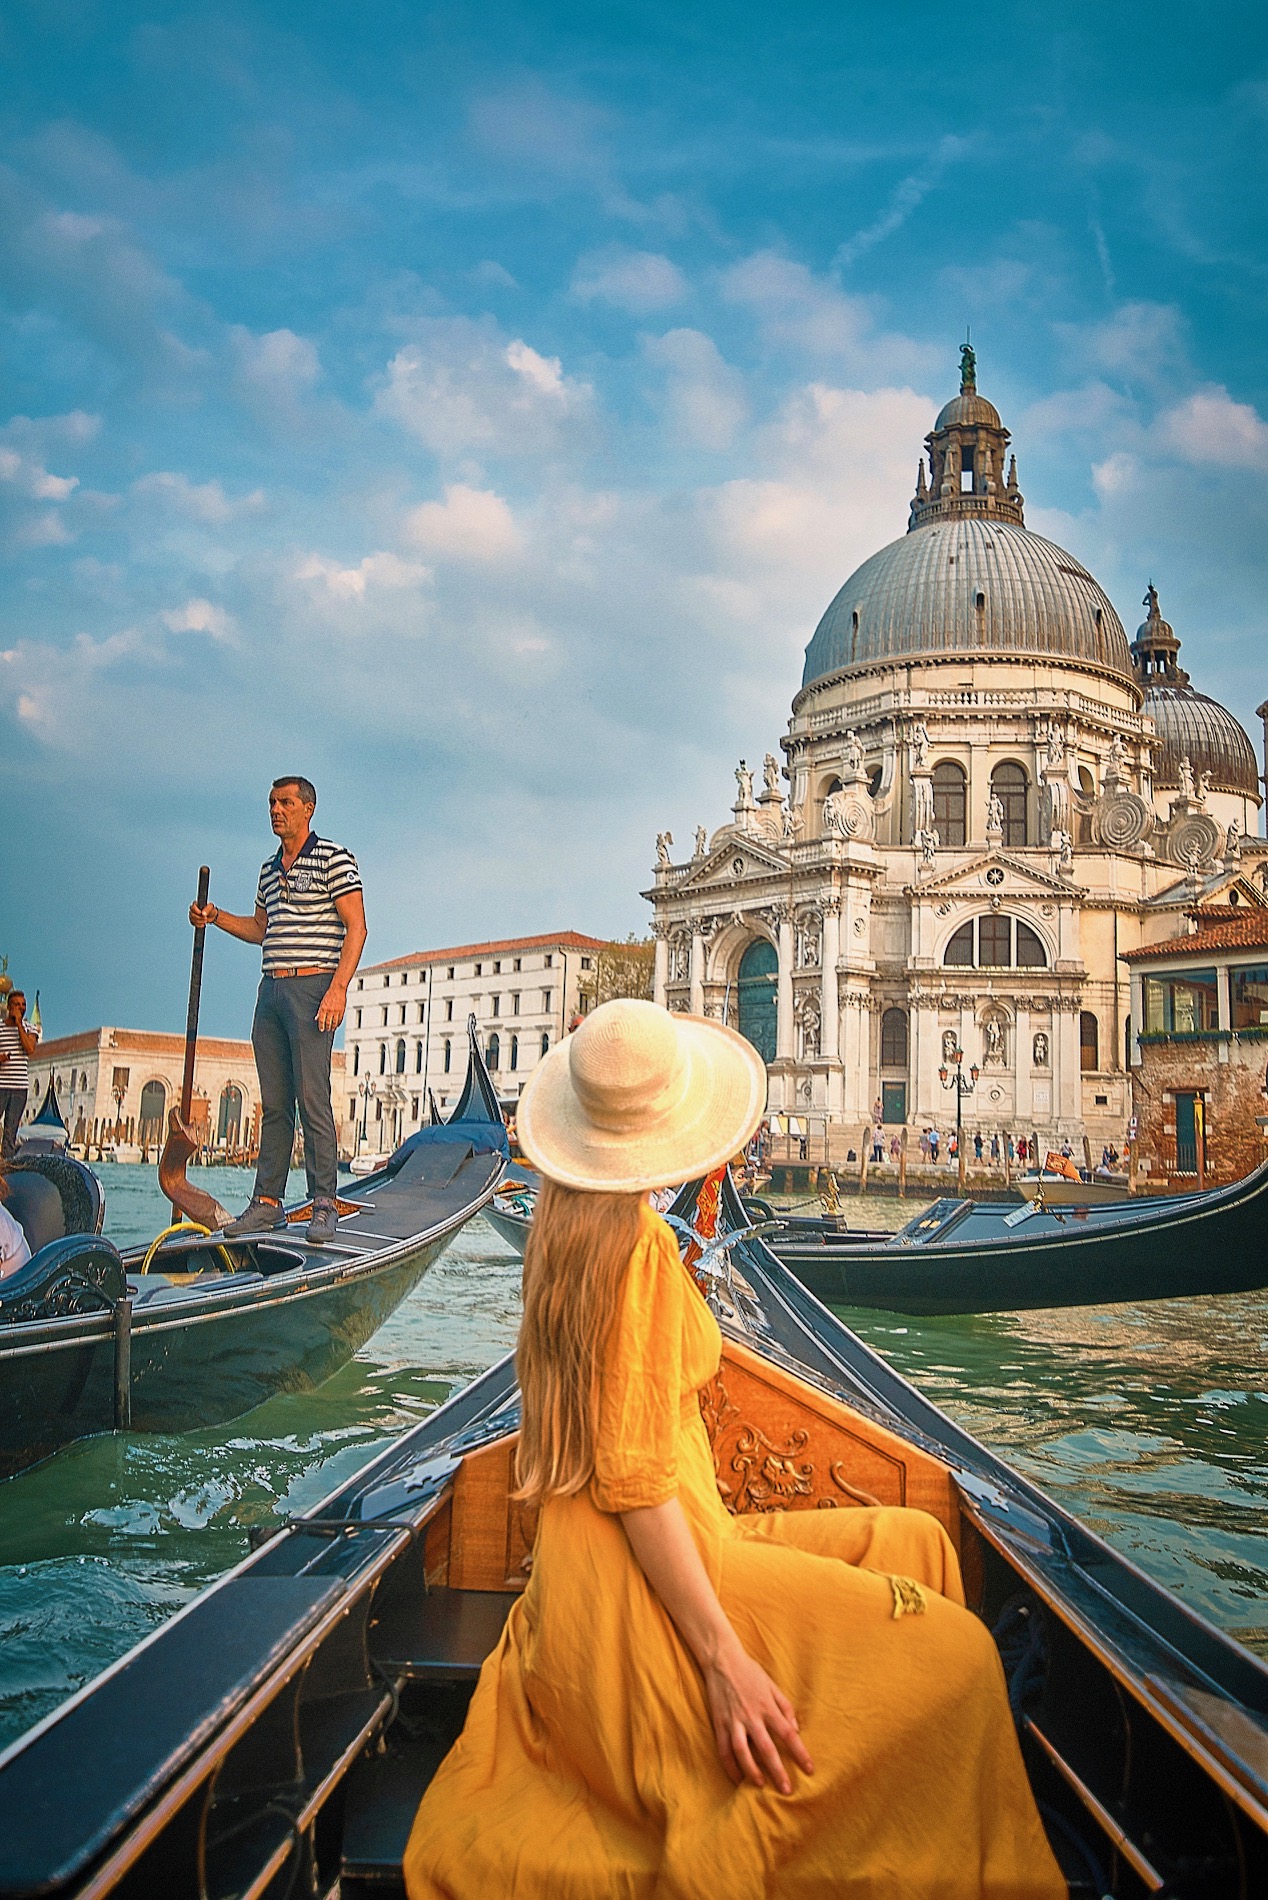 Woman in a yellow dress and hat sits in a gondola on the Grand Canal in Venice, Italy.